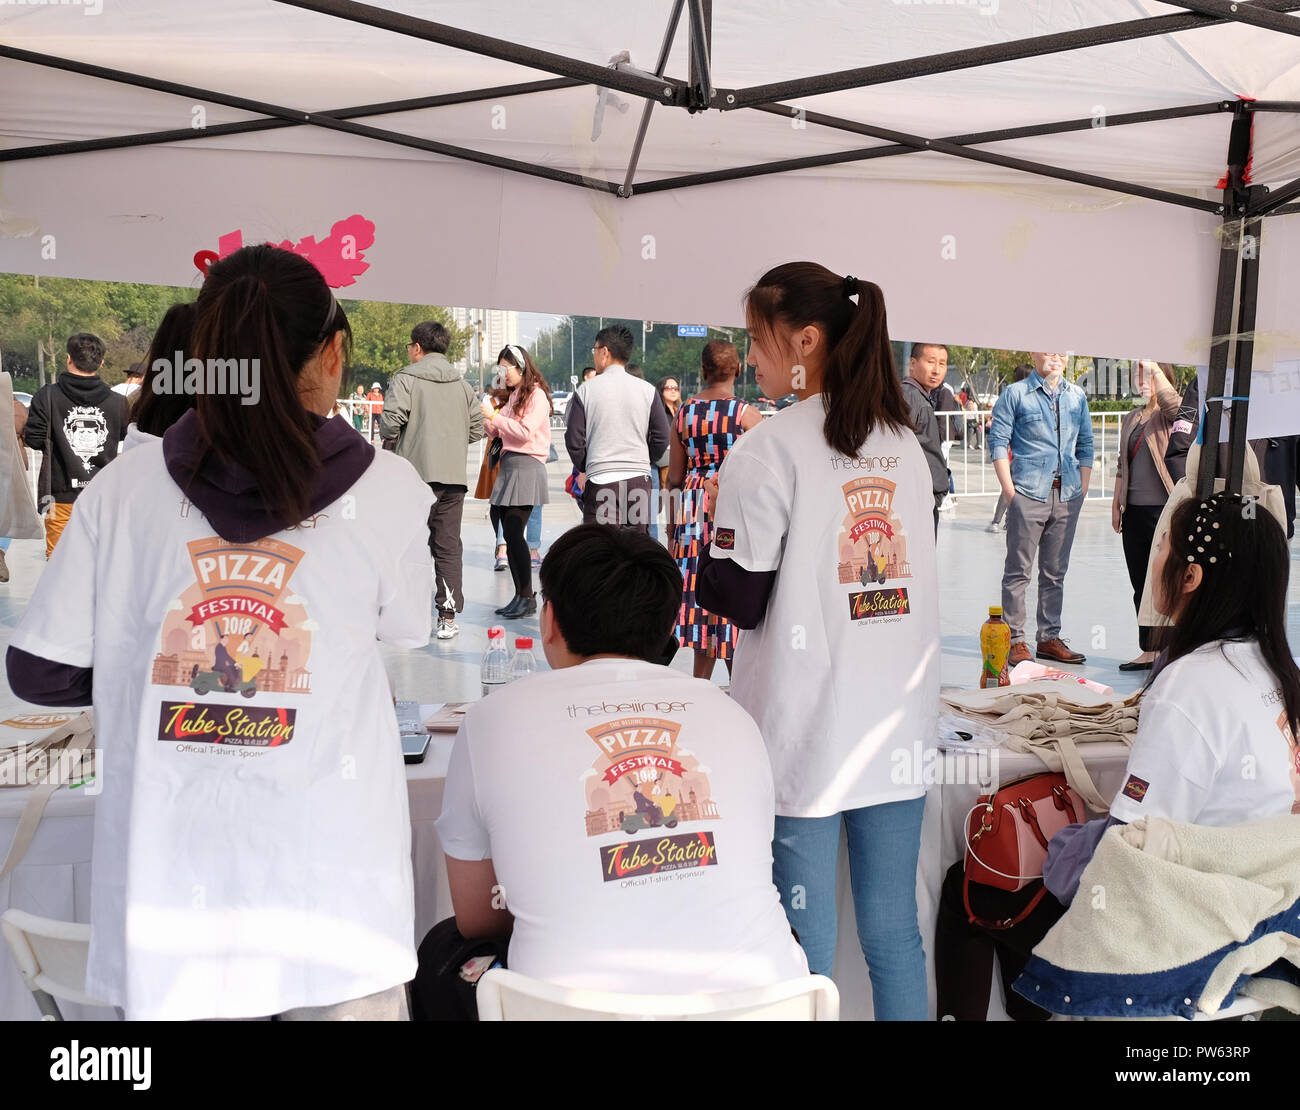 Beijing, China - October 13,2018: Expats and locals enjoying 2018 Beijing Pizza Festival at the Zhongguancun Software Park, Beijing, China. Fifth annual Beijing Pizza Festival on Oct 13-14 festival organized by The Beijinger - free monthly listings and entertainment website and magazine produced by True Run Media in Beijing, China. Stock Photo